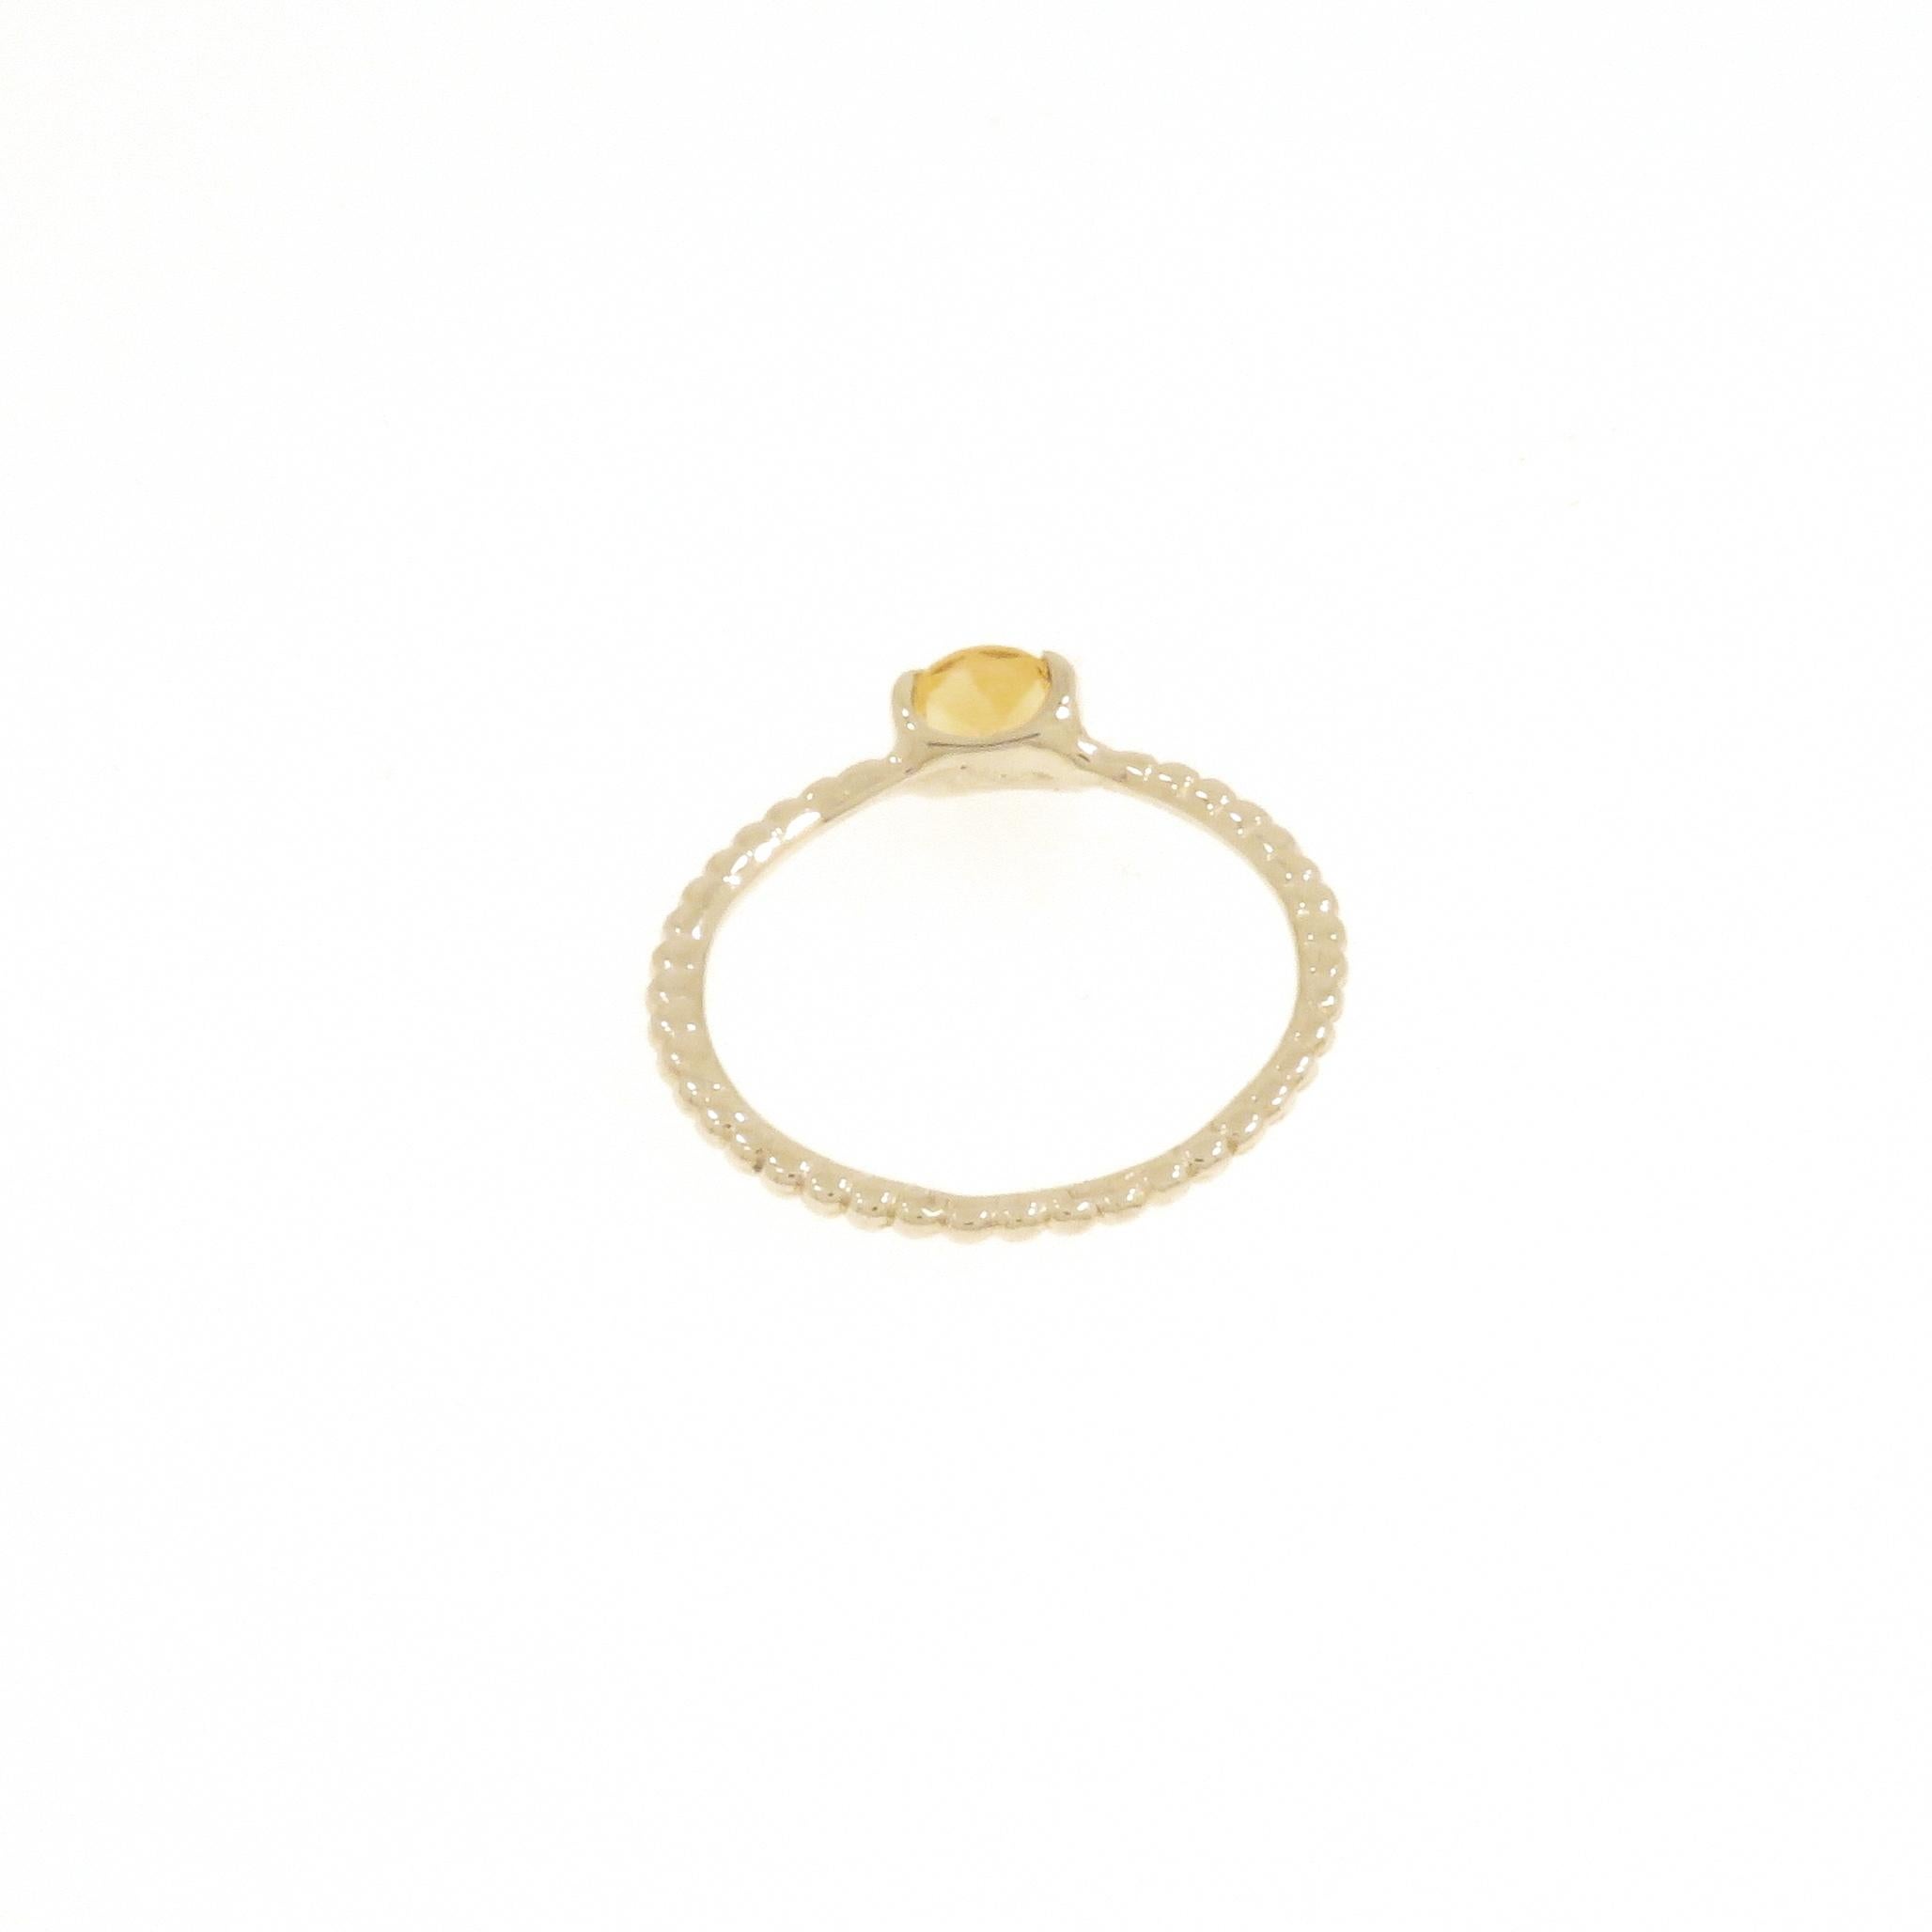 Citrine Withe Gold Stacking Ring Handcrafted in Italy by Botta Gioielli For Sale 3